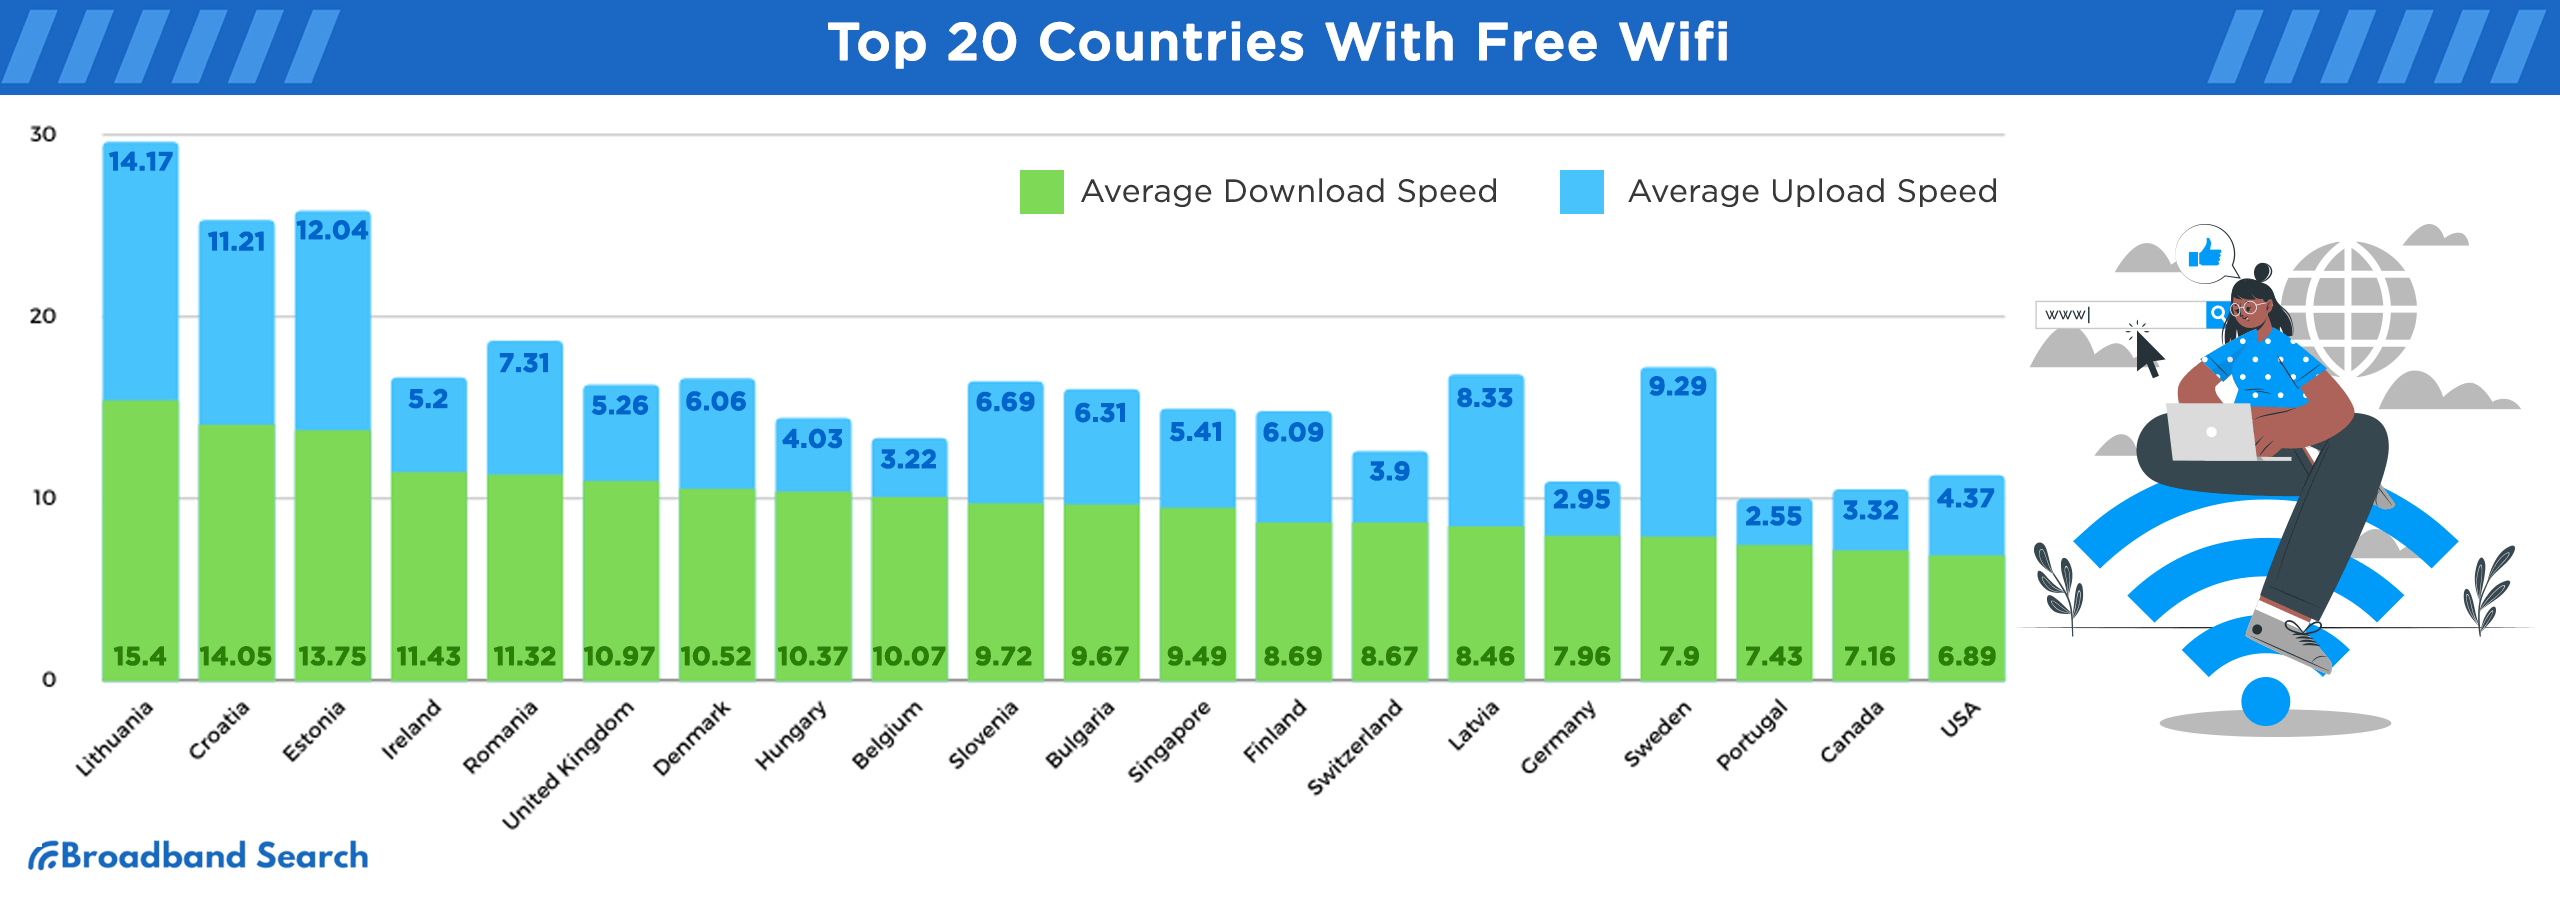 top 20 countries with free wifi